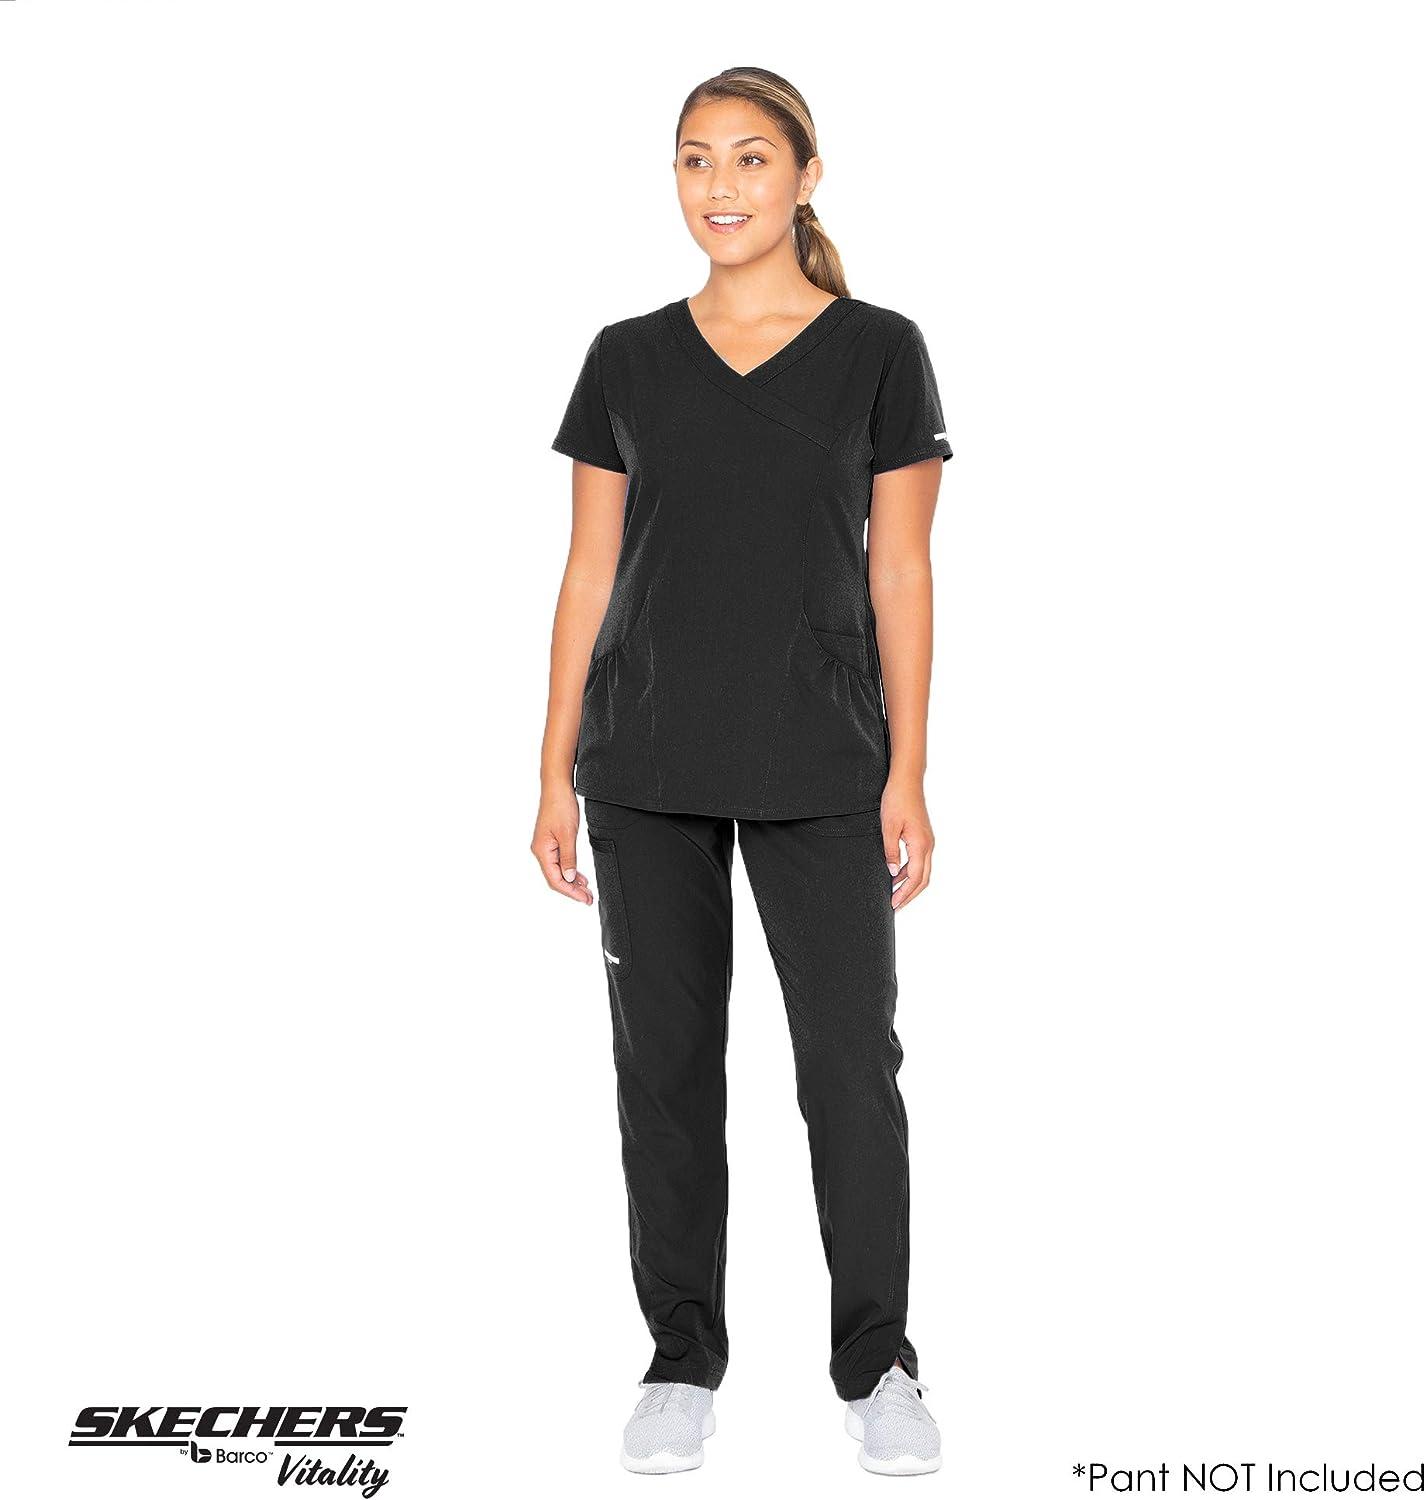 BARCO Skechers Vitality Charge Scrub Top for Women - V-Neck Medical Top  4-Way Stretch Women's Scrub Top Large Black